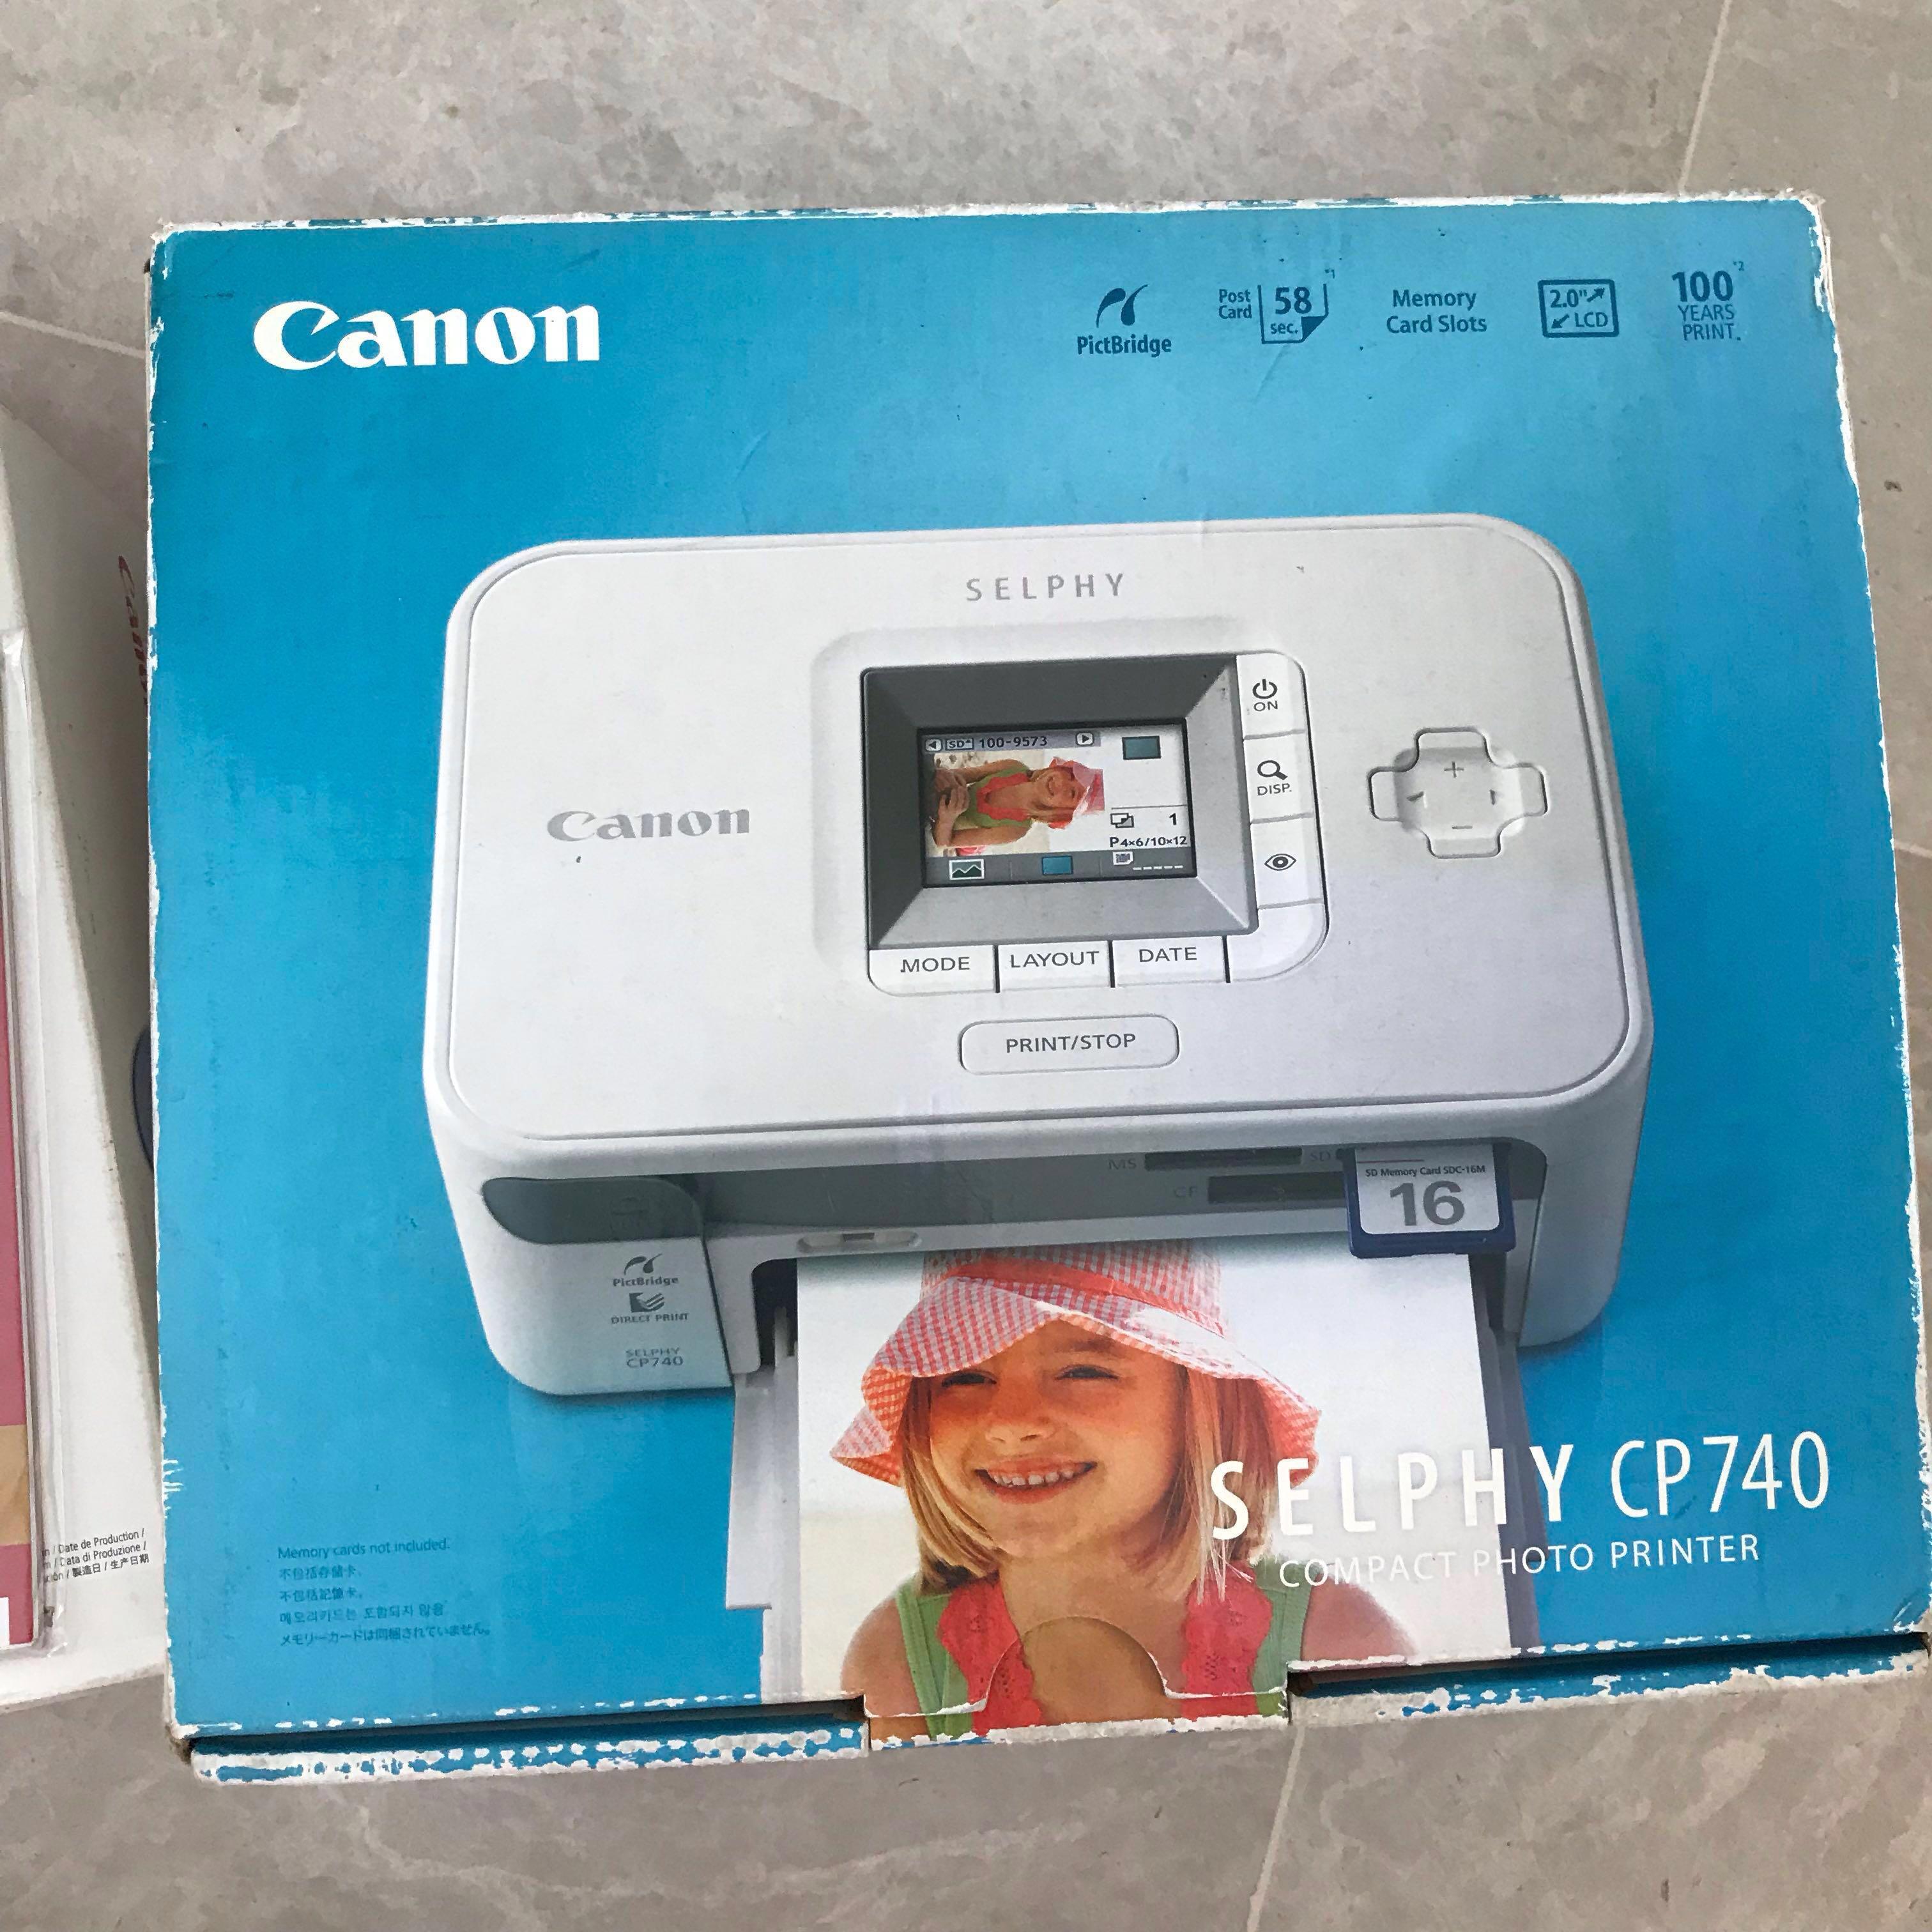 Canon Selphy Cp740 Compact Photo Printer Set Computers And Tech Printers Scanners And Copiers On 8434